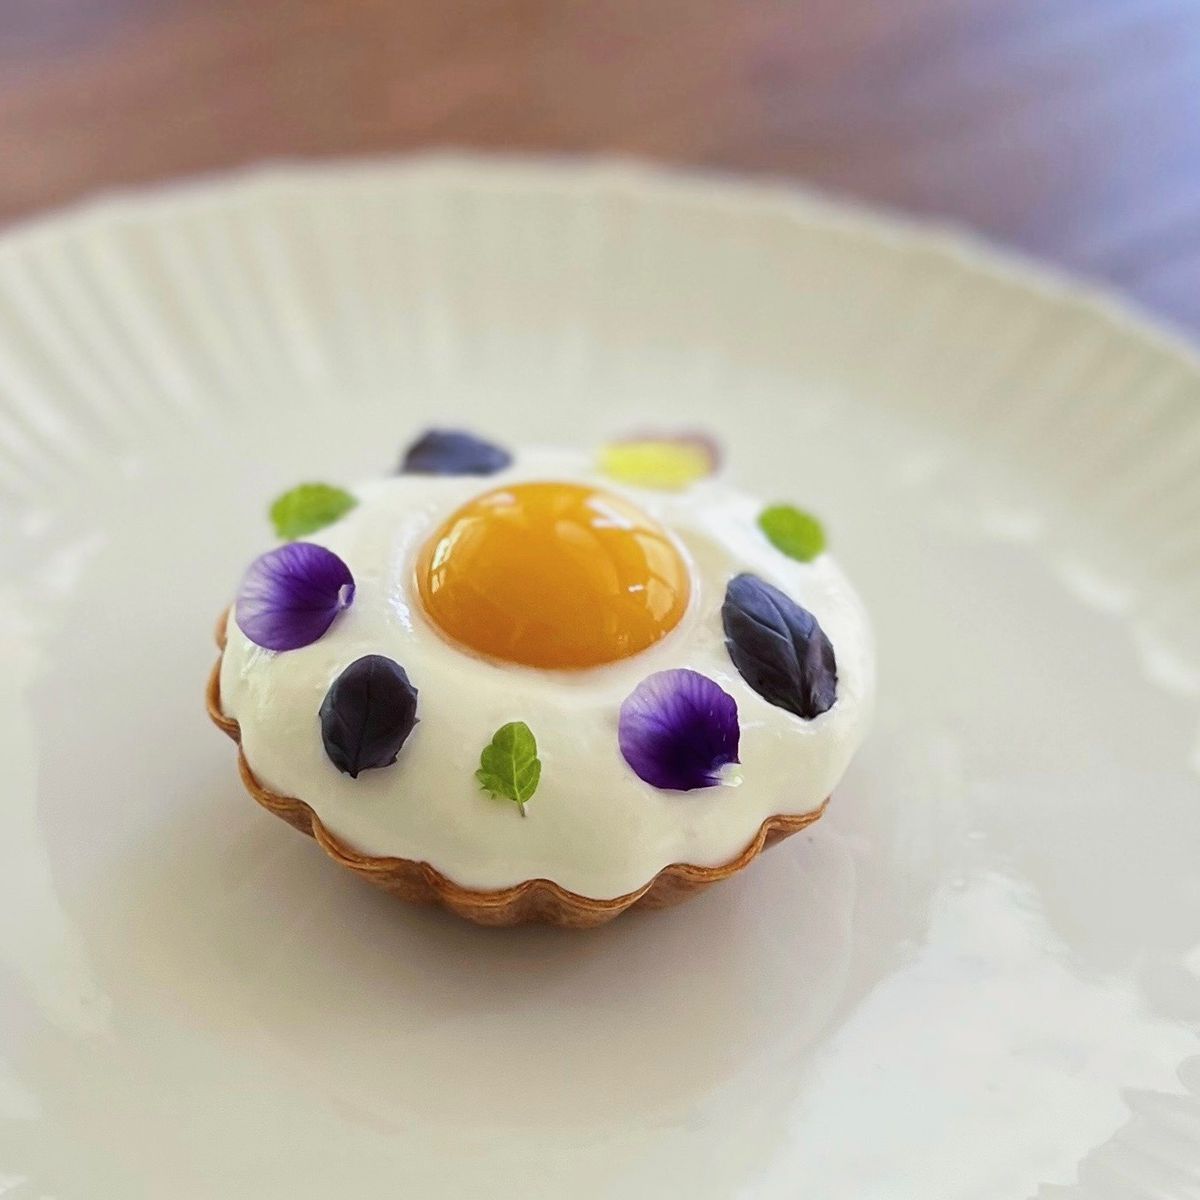 A plate holds a round “egg tart” made to look like an over easy egg, with petals of flowers atop the egg white portions.